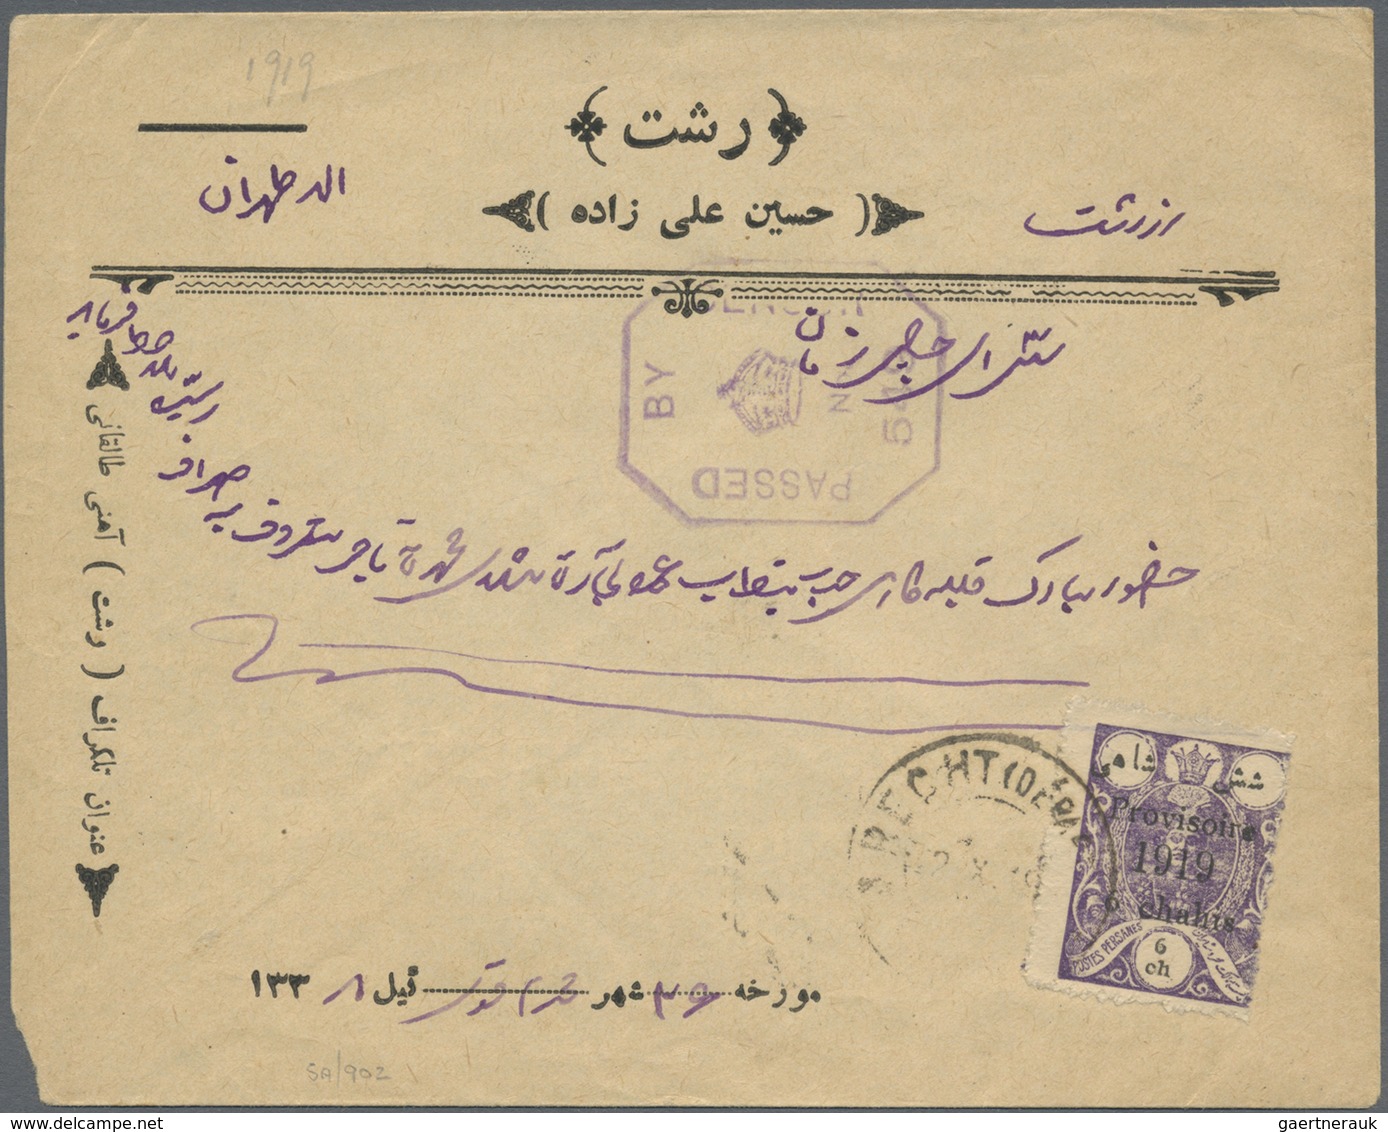 Br Iran: 1918-19, Two Covers With Censors, Cancelled Recht And Zendjan, Fine Pair - Iran